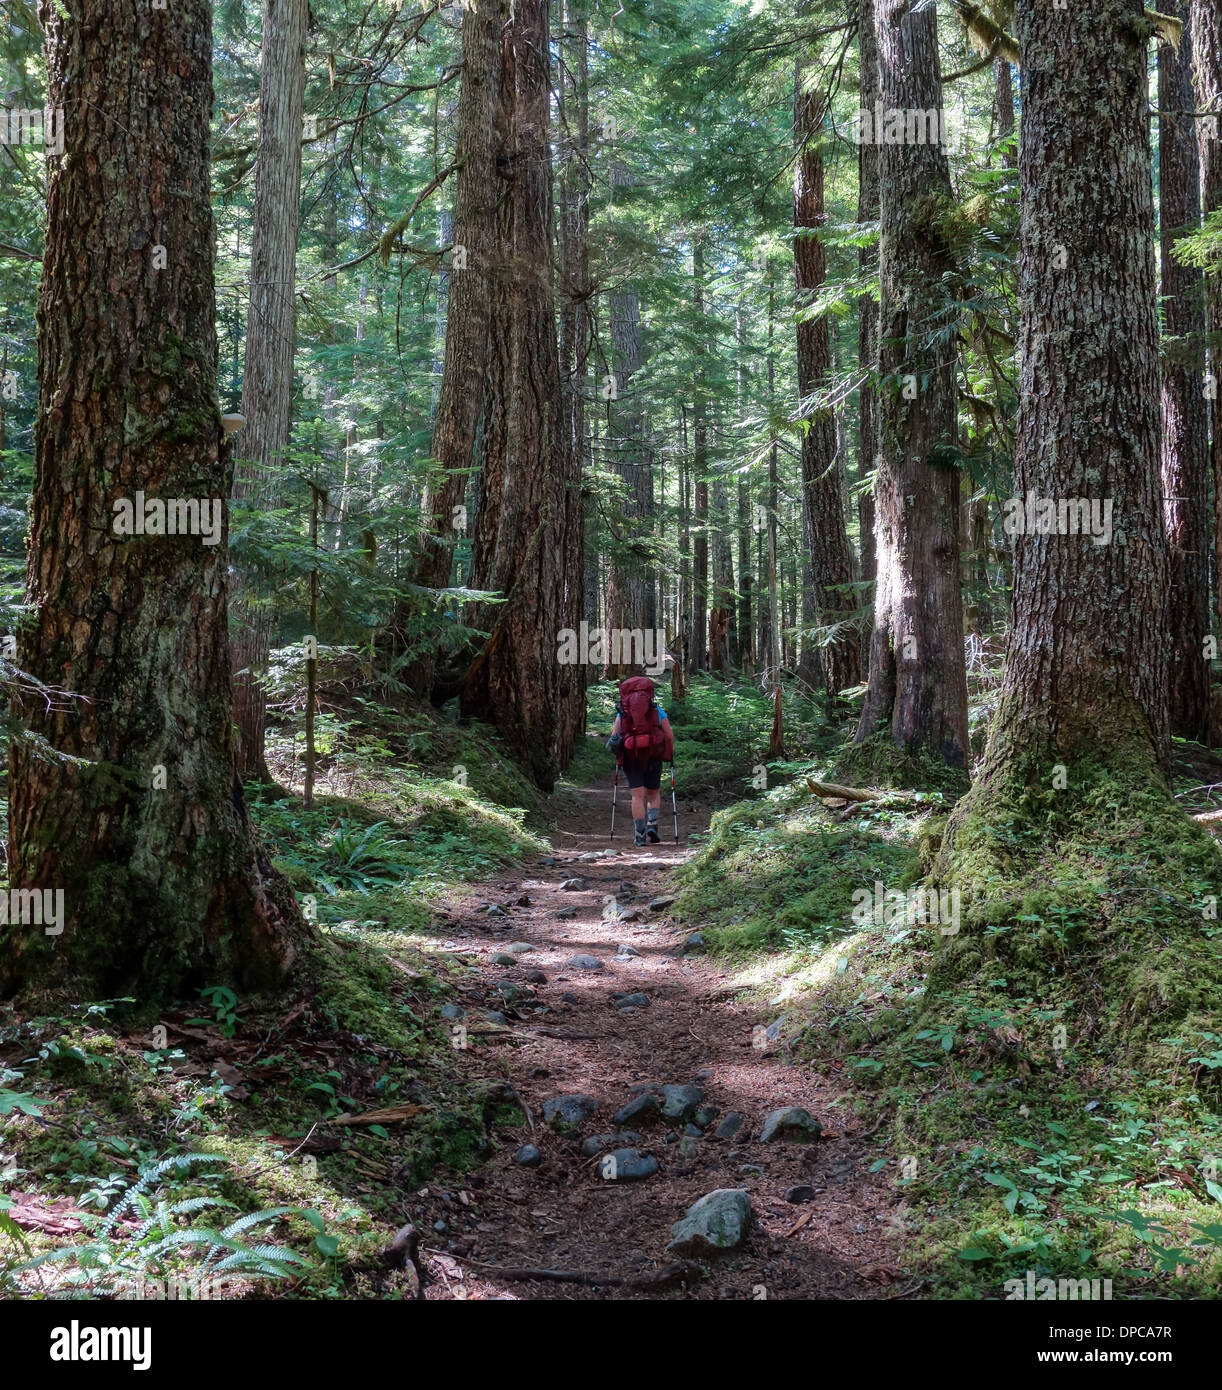 A lone hiker walks among an old growth stand of hemlock and cedar along the Wonderland Trail in Washington State. Stock Photo